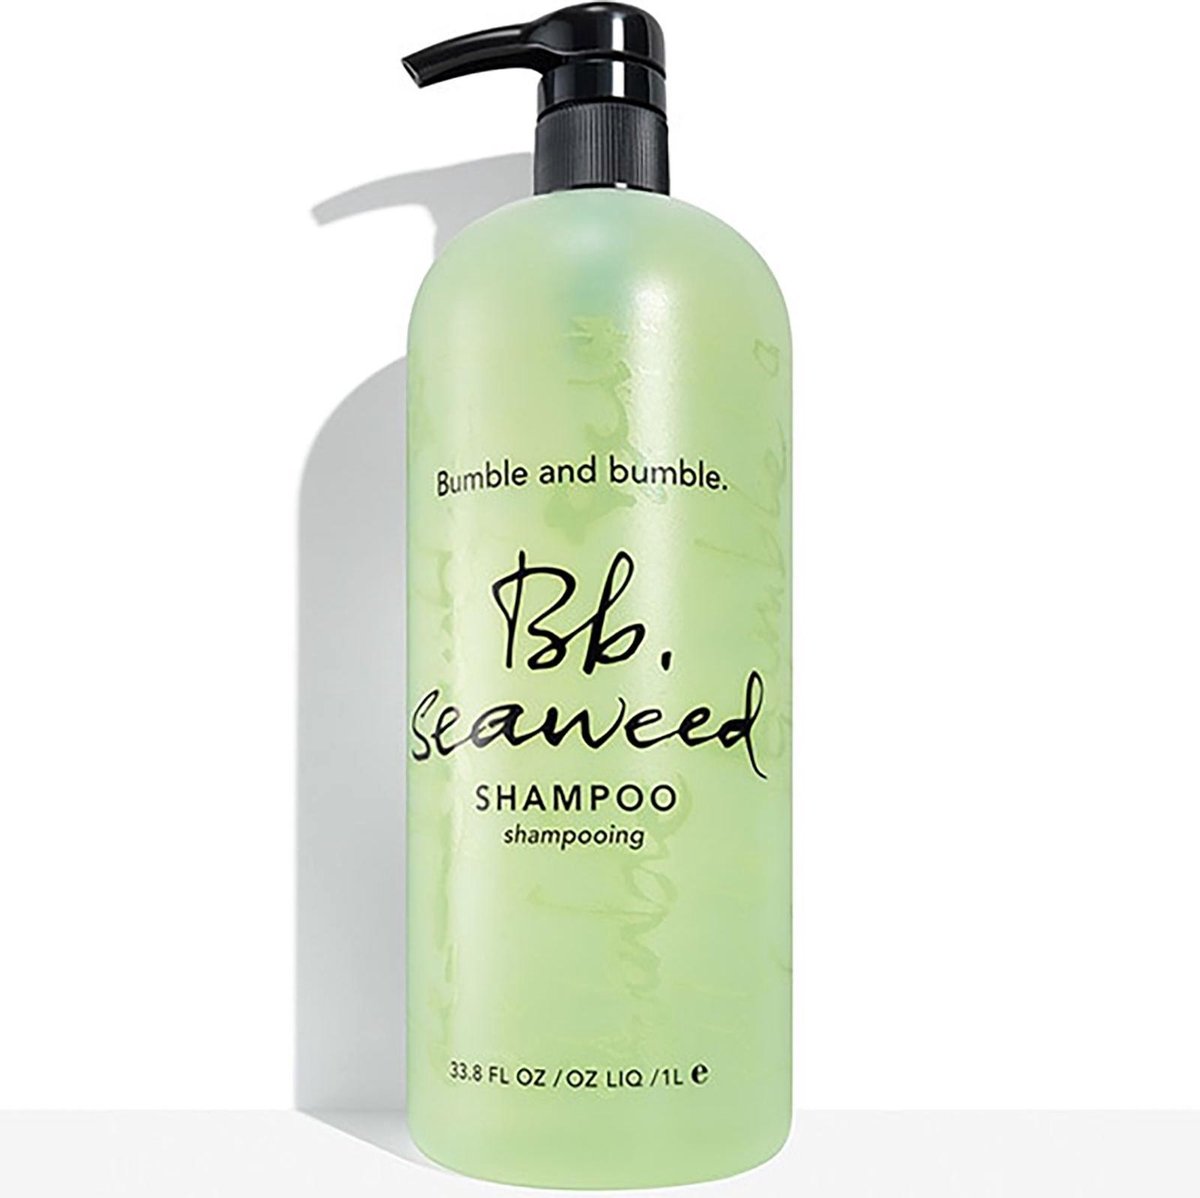 Bumble and bumble Seaweed Shampoo-1000 ml - vrouwen - Voor